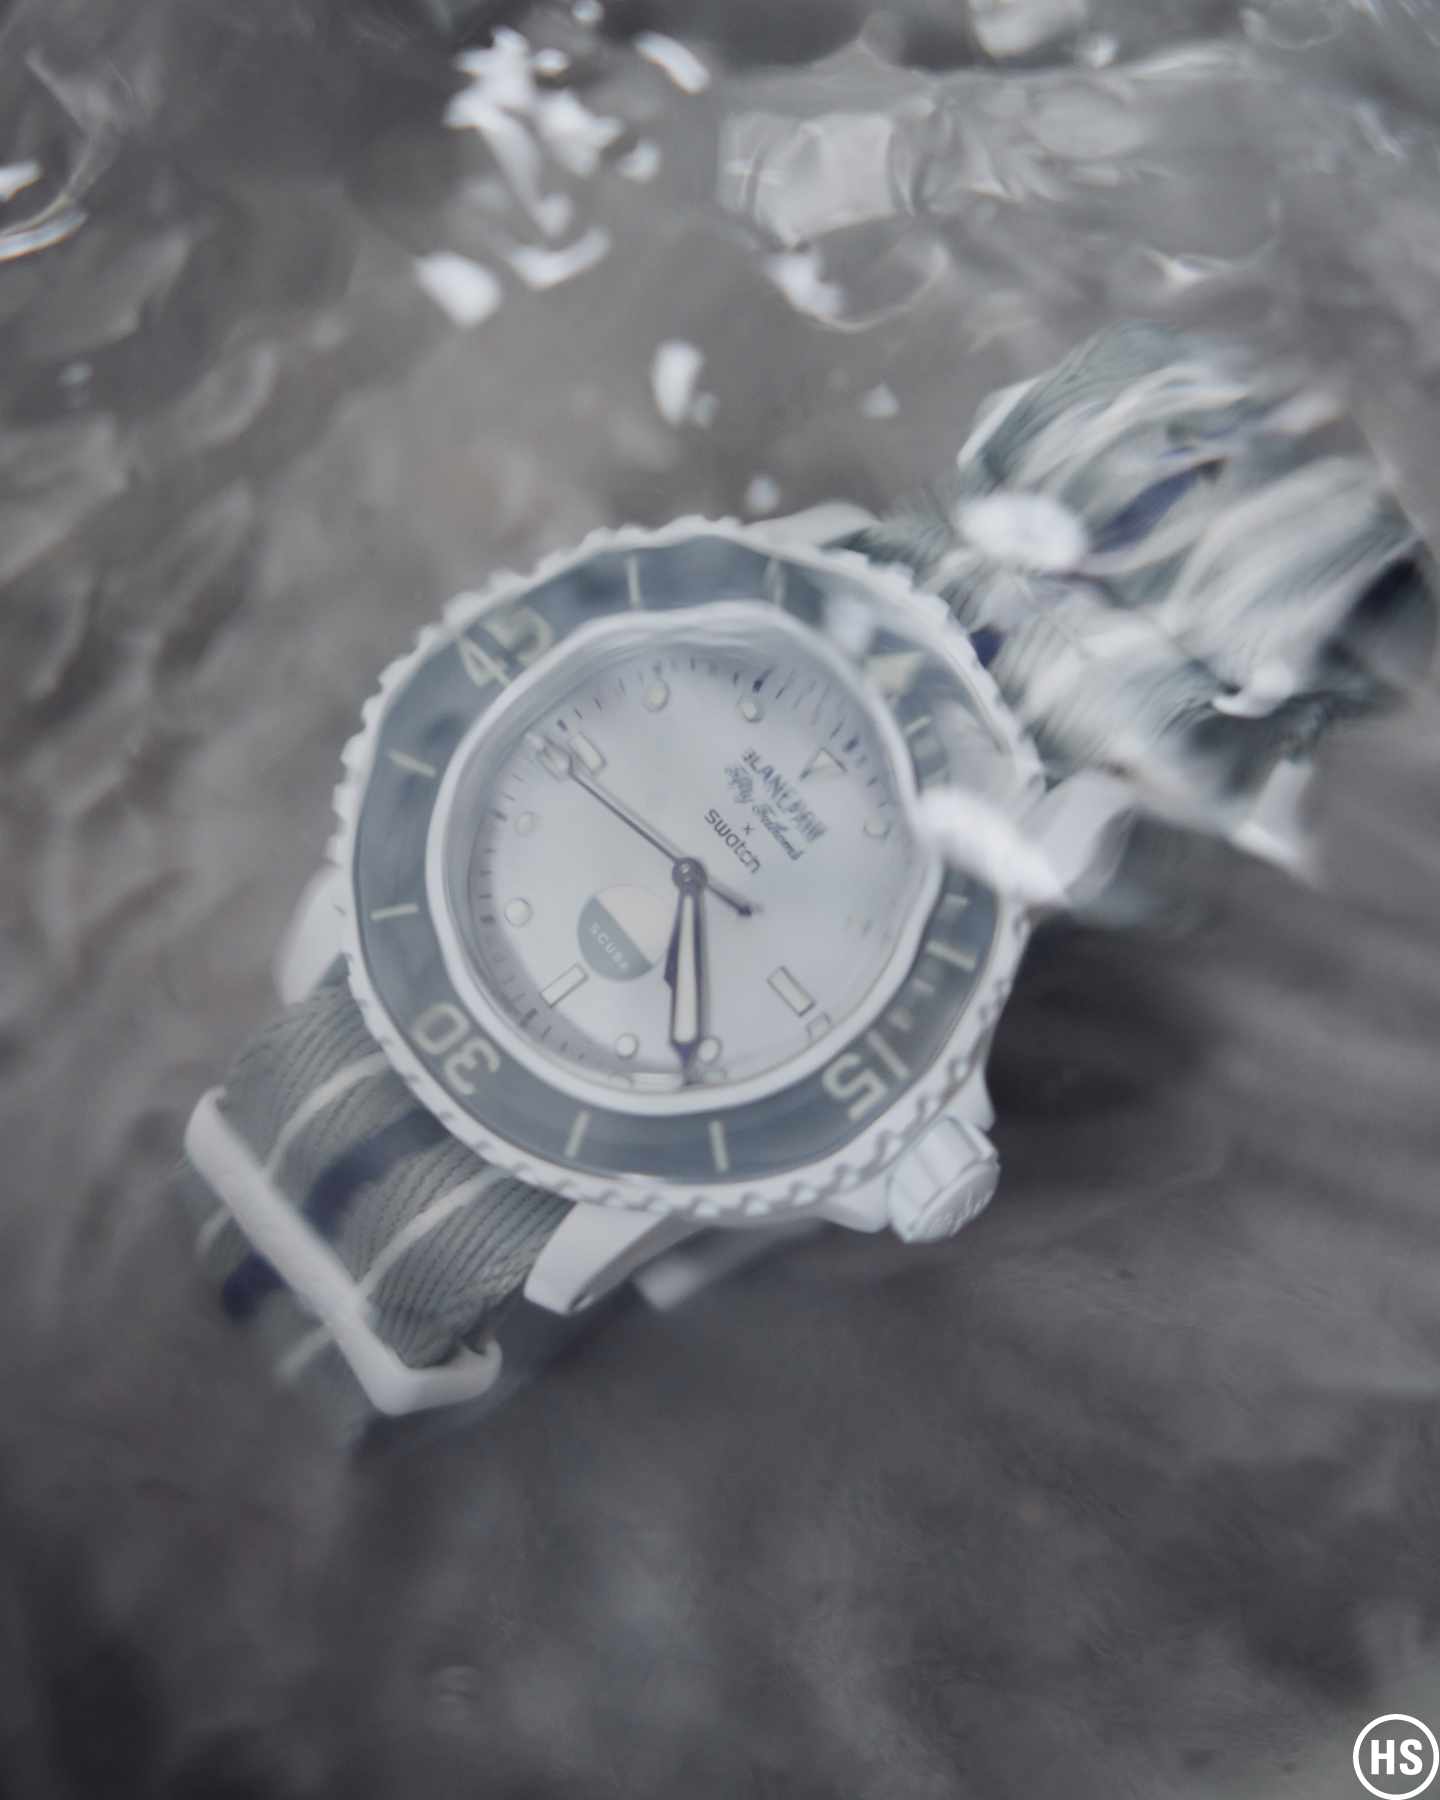 Swatch & Blancpain's Bioceramic Scuba Fifty Fathoms diving watch collaboration, designed in homage to the planet's five oceans